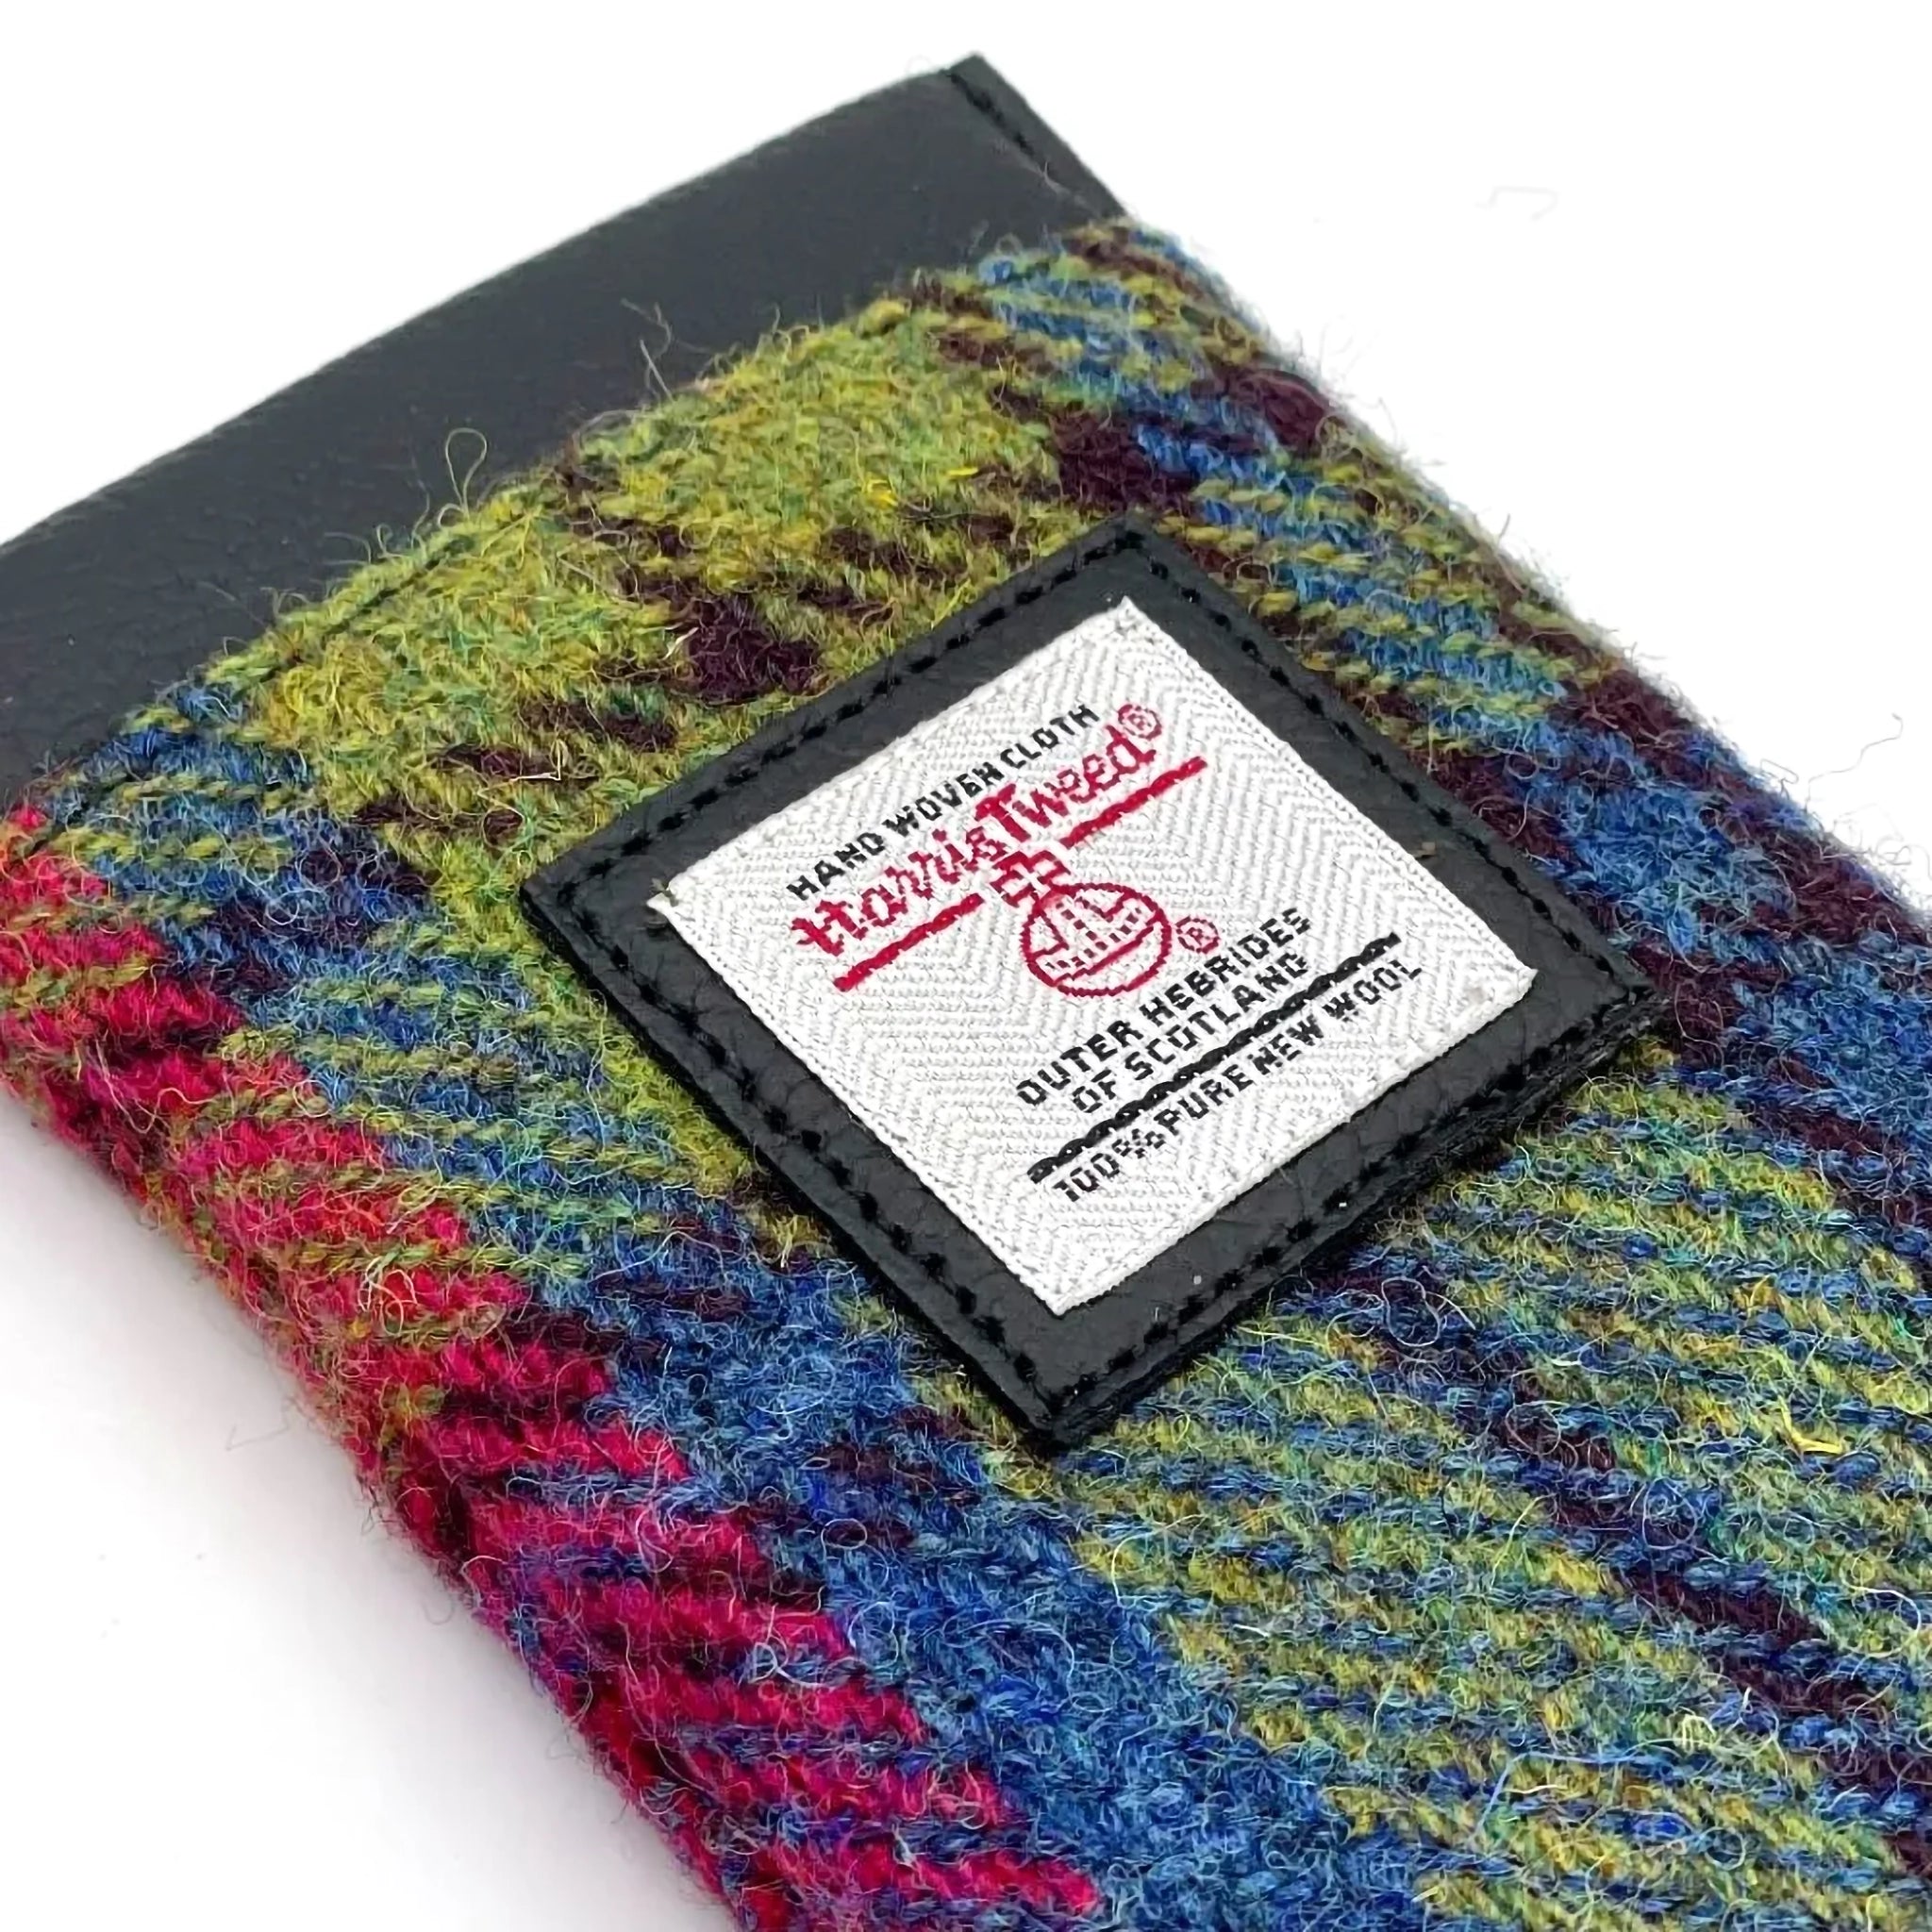 Harris Tweed orb on glasses sleeve in pink, green and blue check